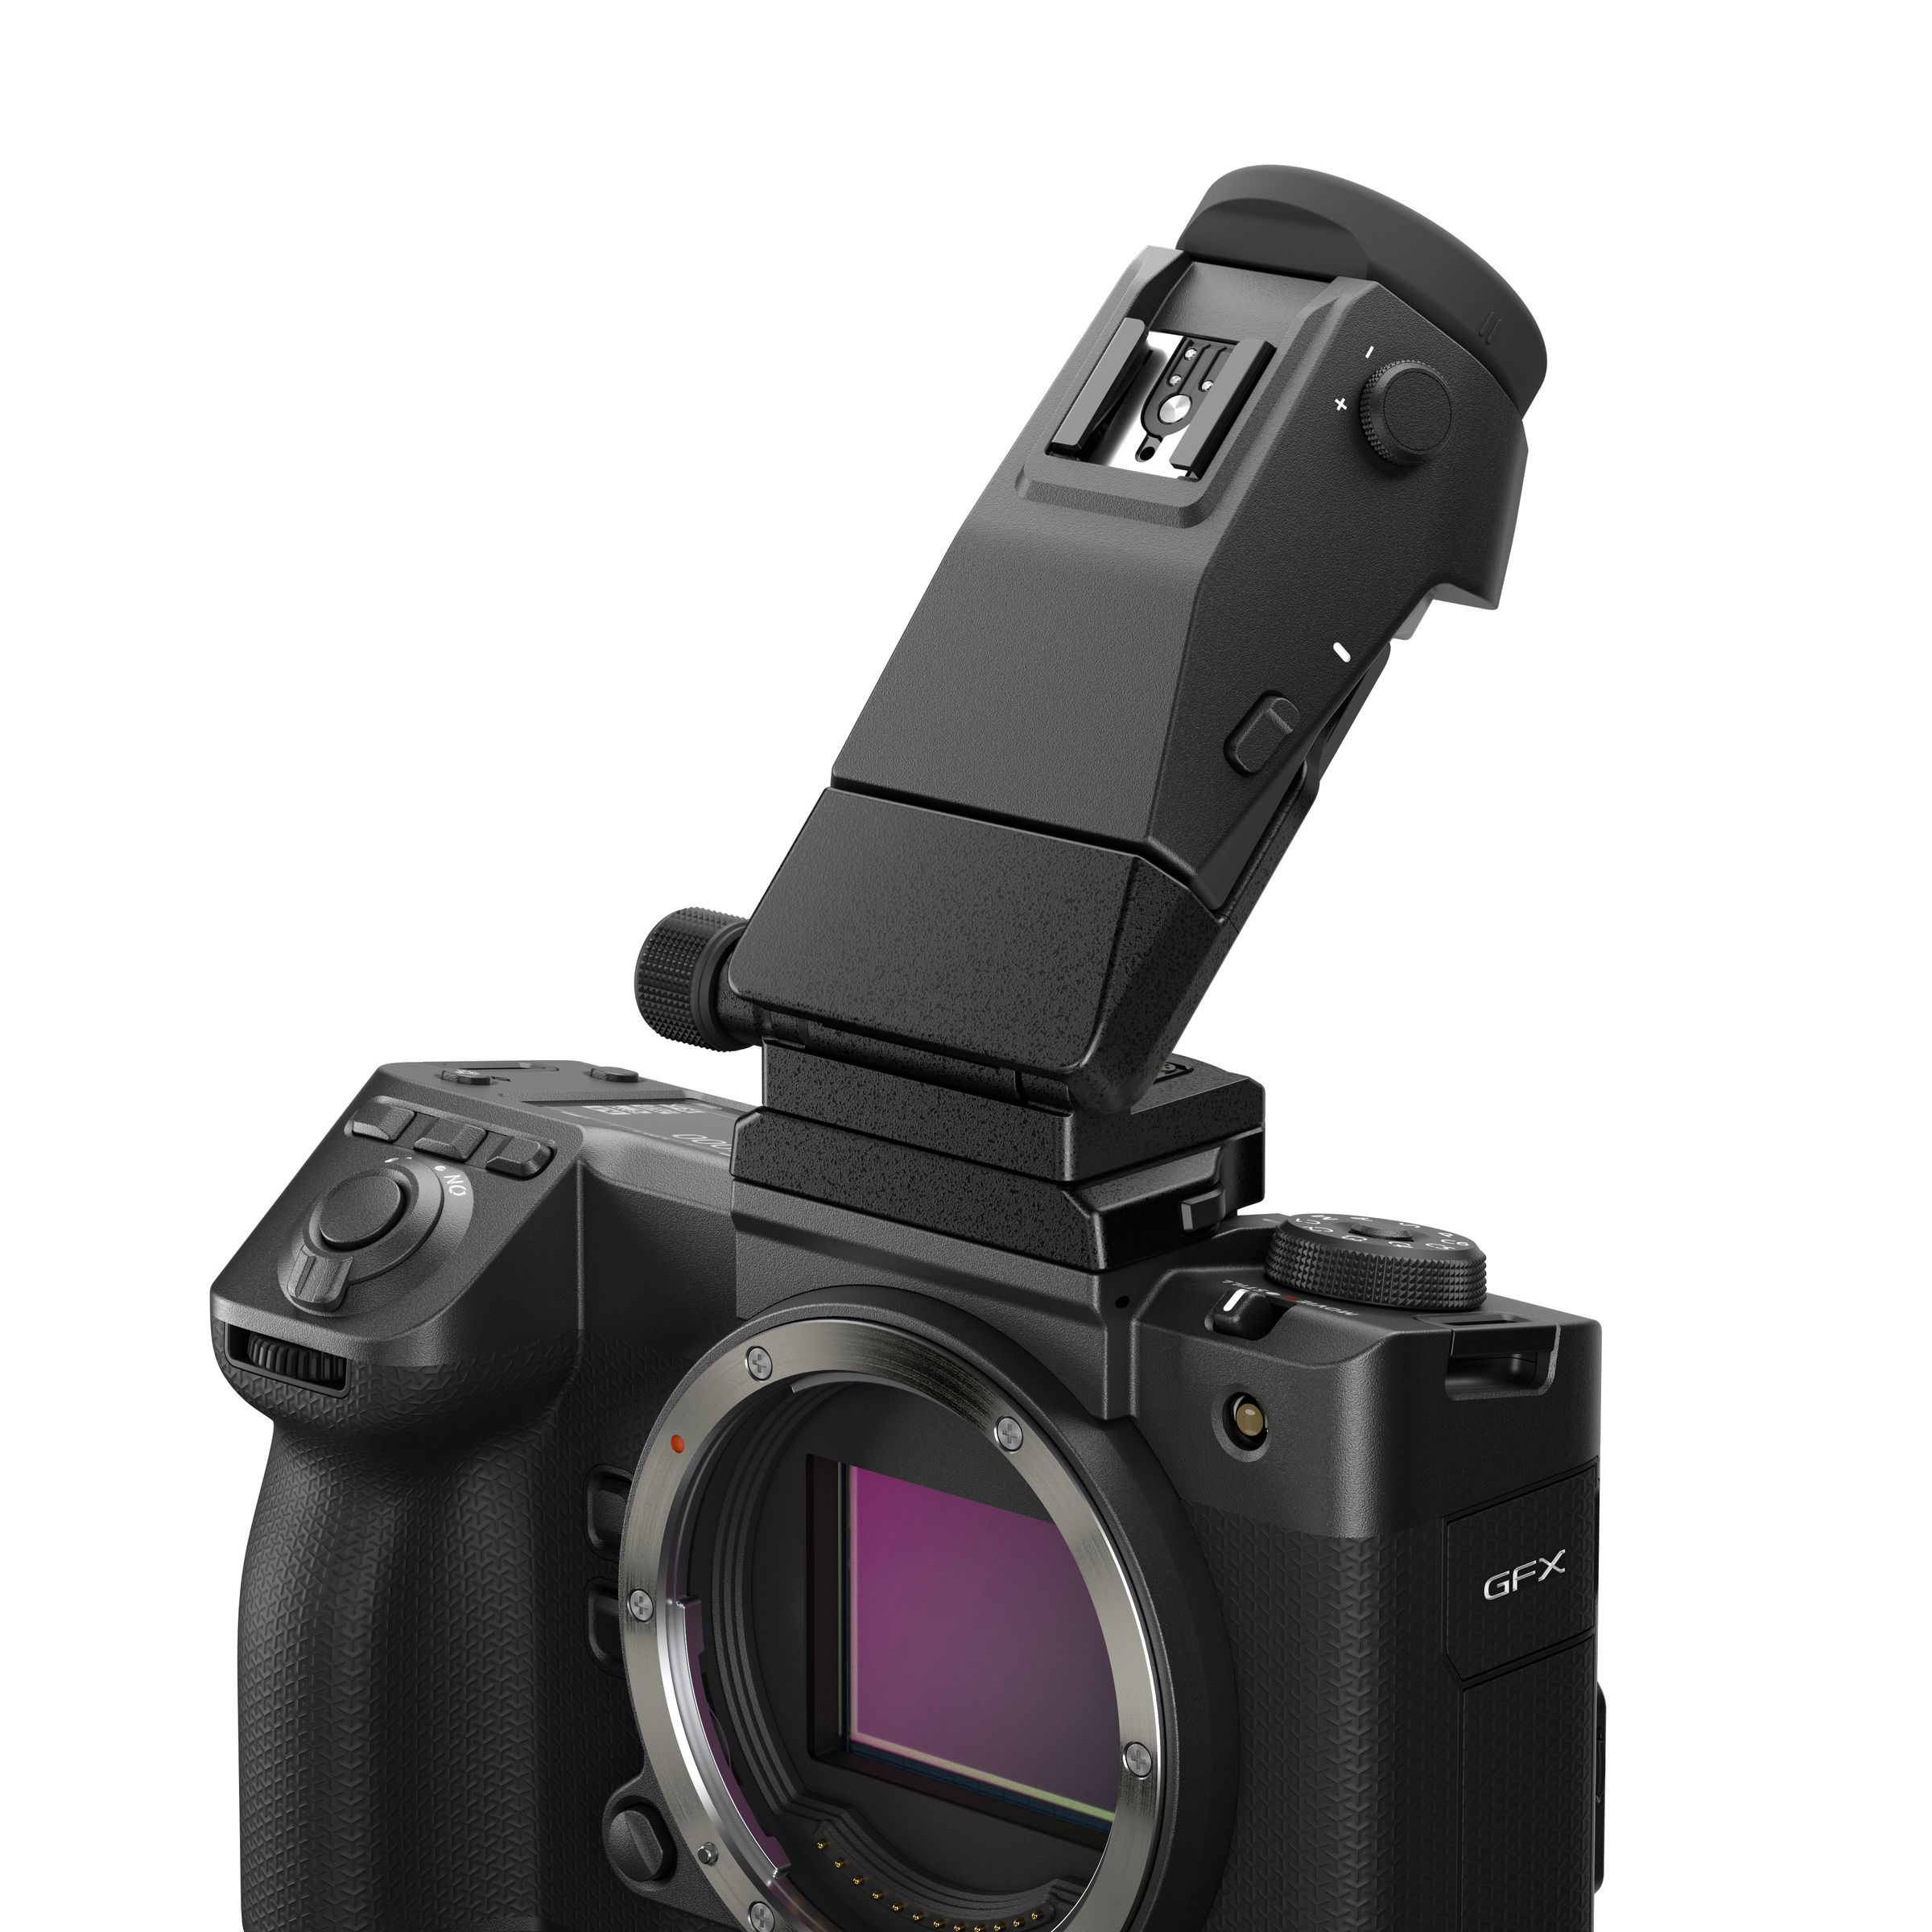 Like the GFX100 and GFX50S, the GFX100 II has a removable viewfinder, allowing the use of the EVF-TL1 tilt adapter to use the EVF at a lower angle. Nifty, yes. But it also costs over $500.